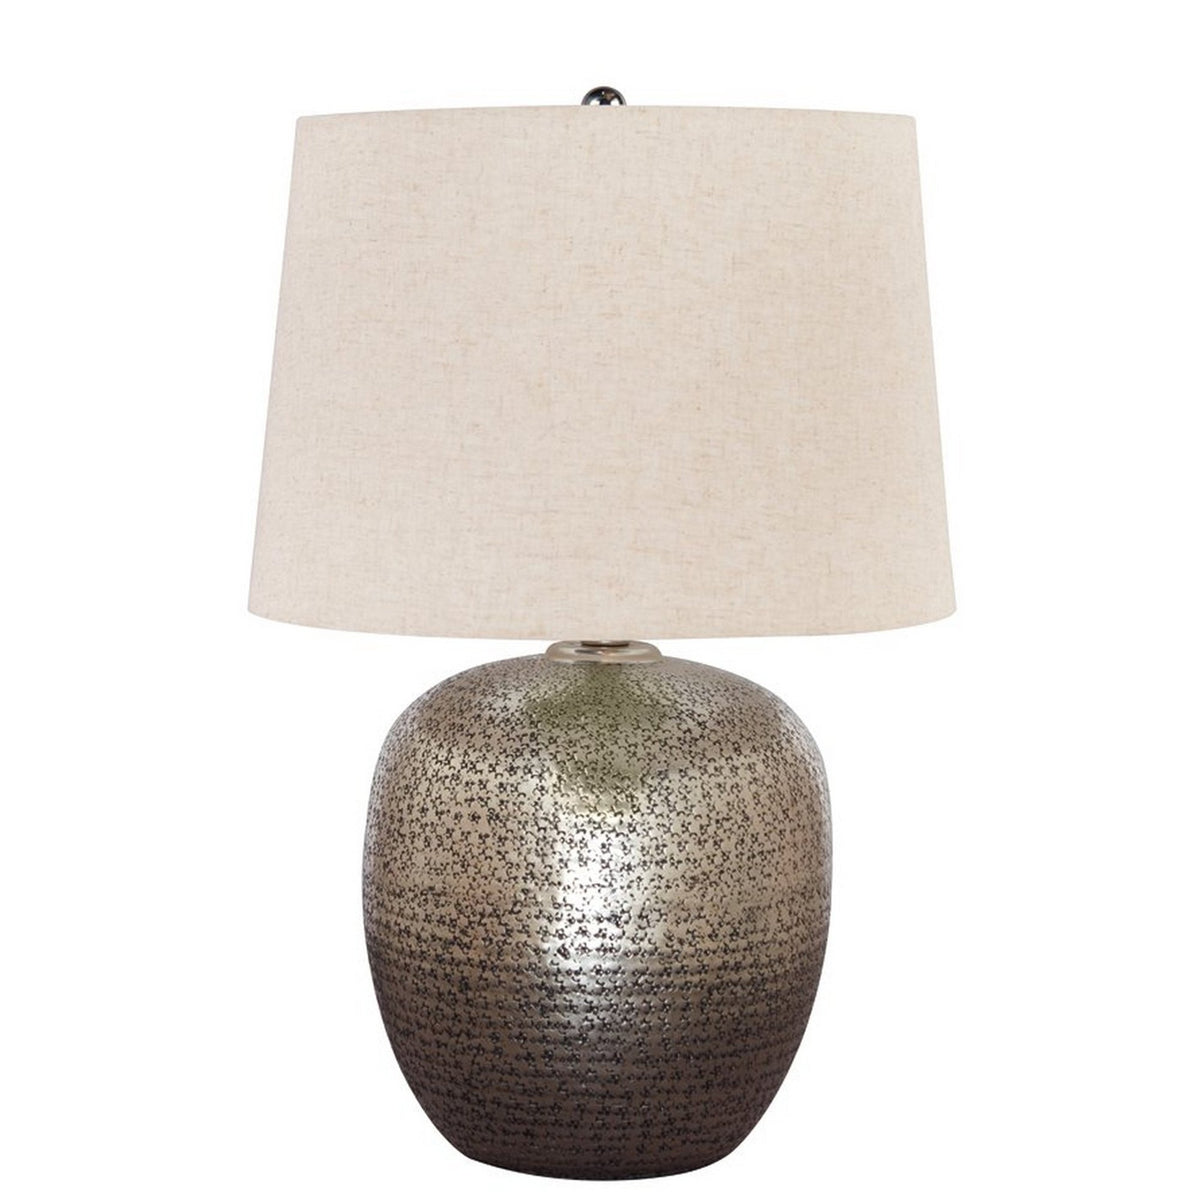 Bellied metal Body Table Lamp with Splotched Details, Brass and Cream - BM227196